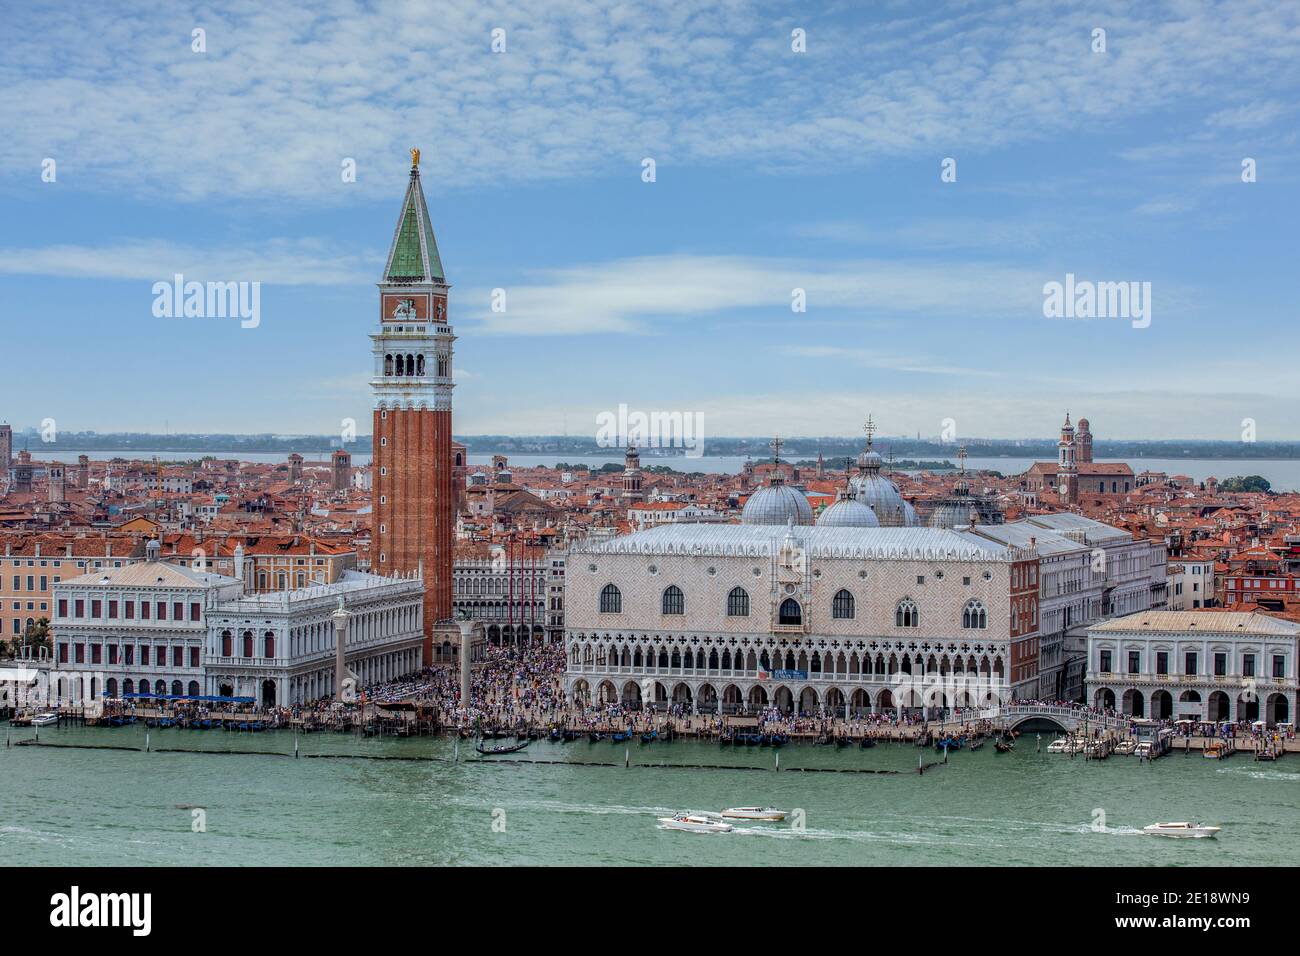 Aerial view of st marks square, Venice, Italian island tourist attraction. Piazza San Marco bridge of sighs Stock Photo